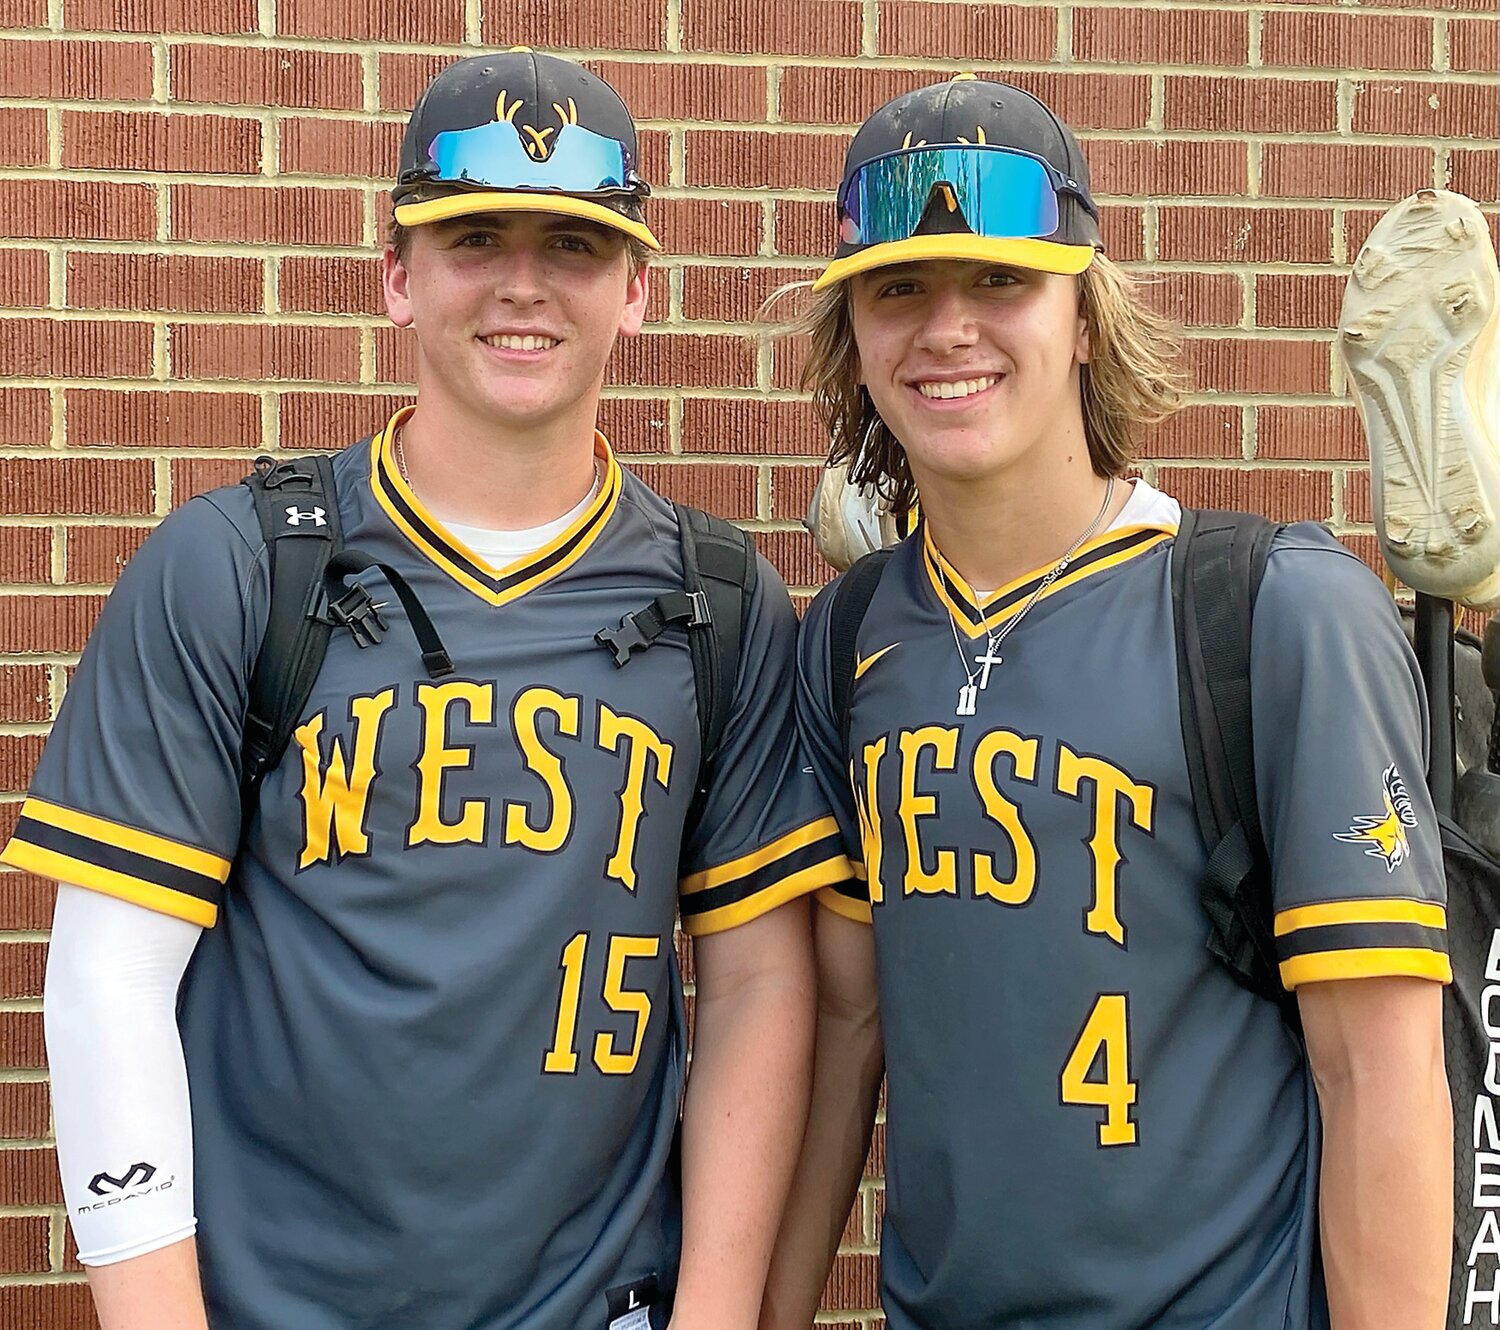 Brothers Sam Greer, left, and Jacob Greer are taking the mound this spring for Central Bucks West, the defending District One 6A champion.